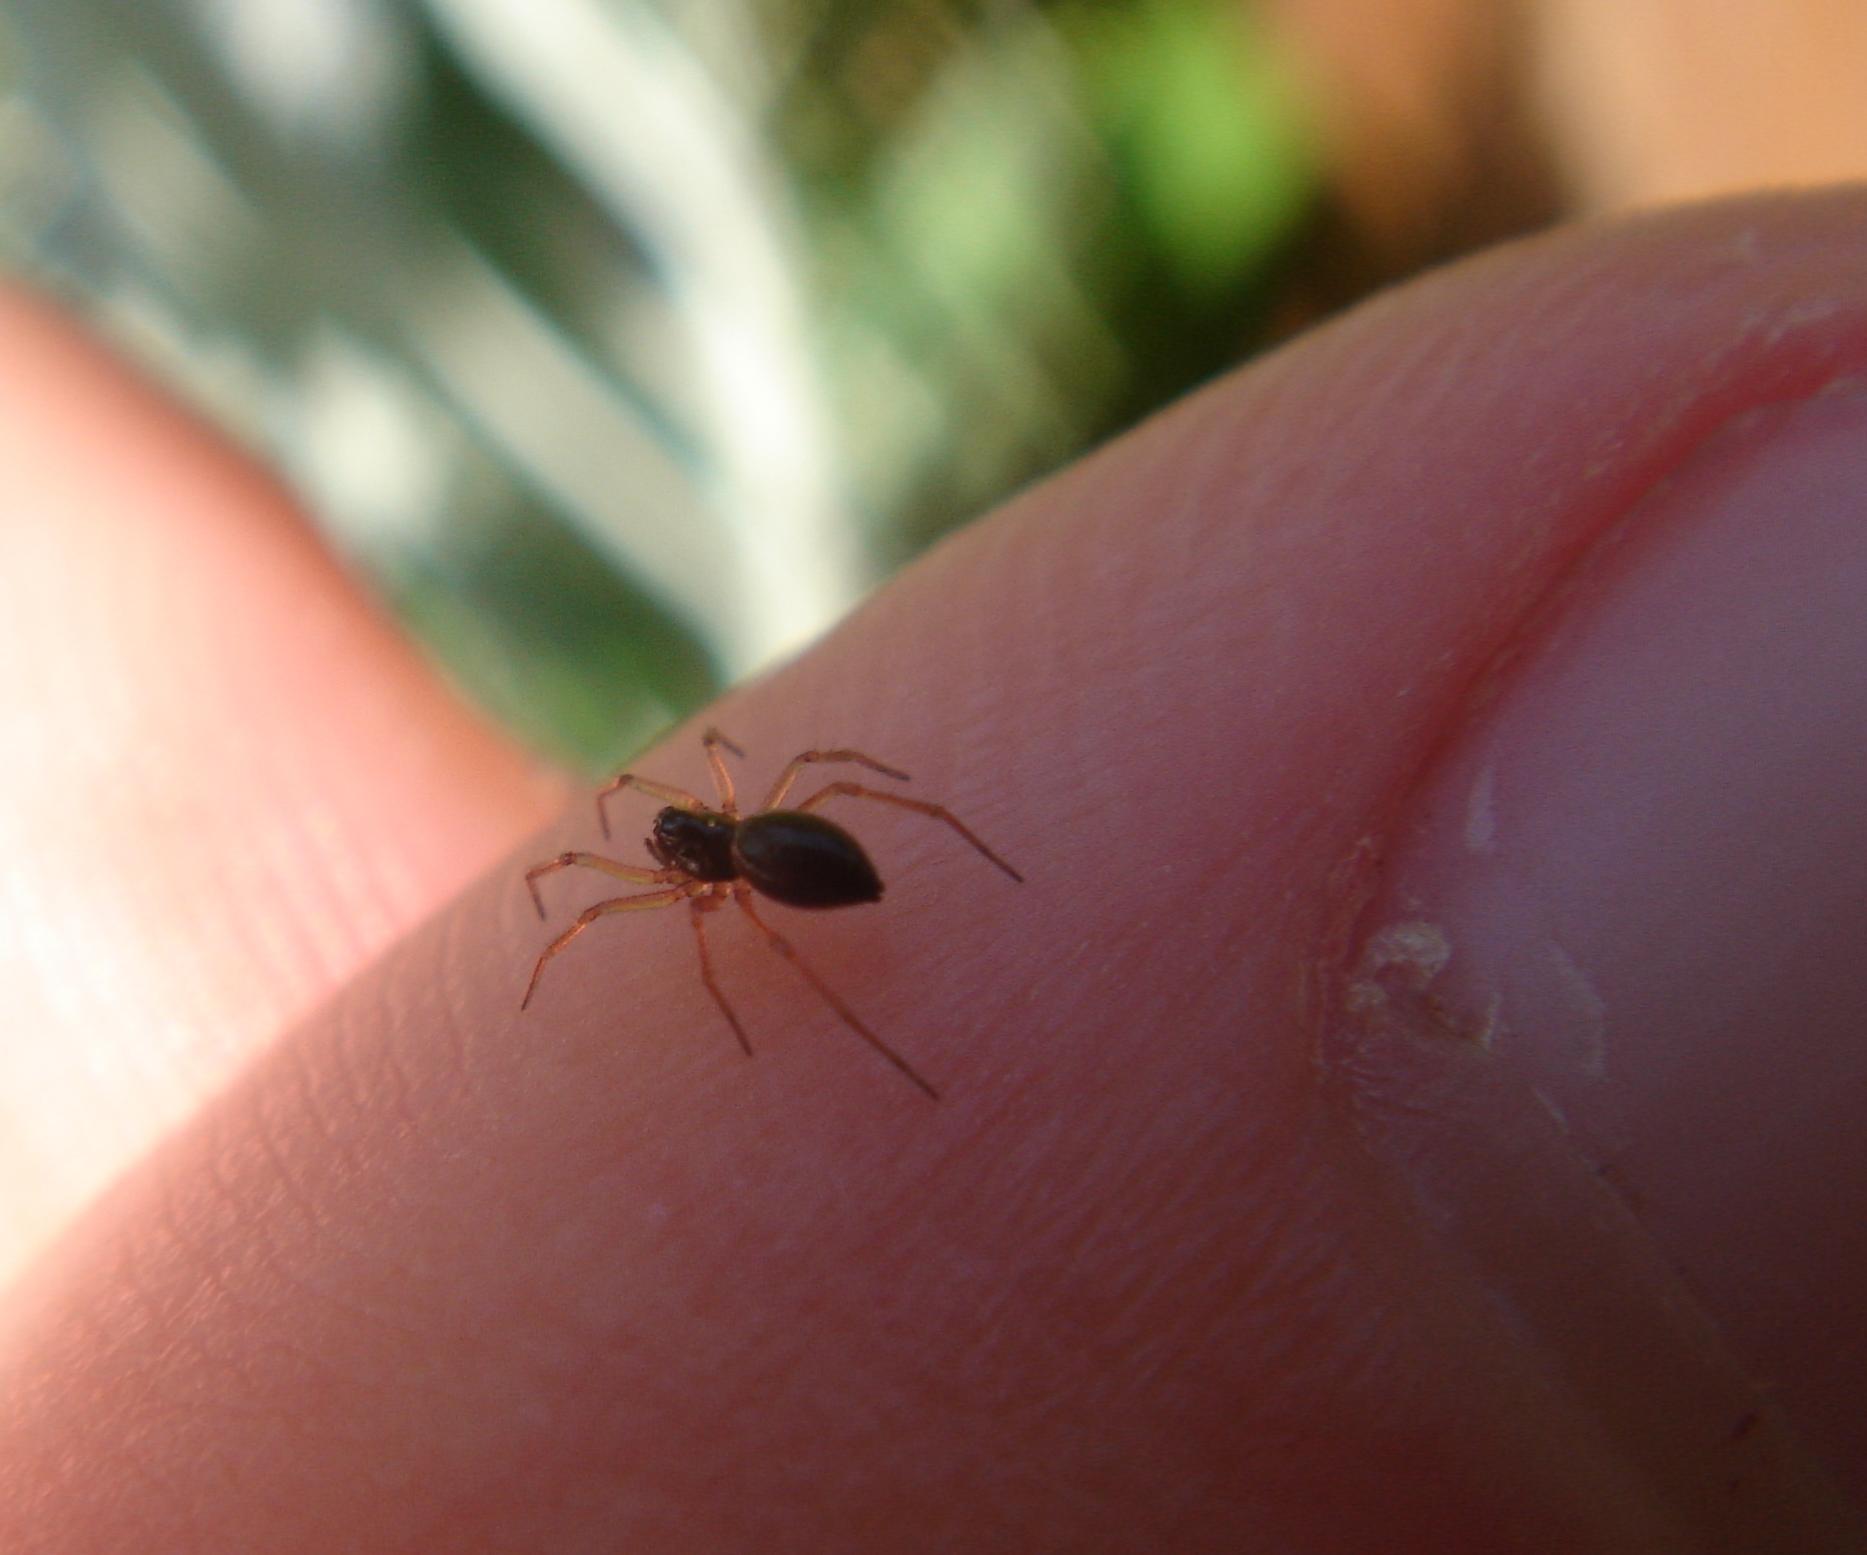 File:Tiny little spider.jpg - Wikimedia Commons